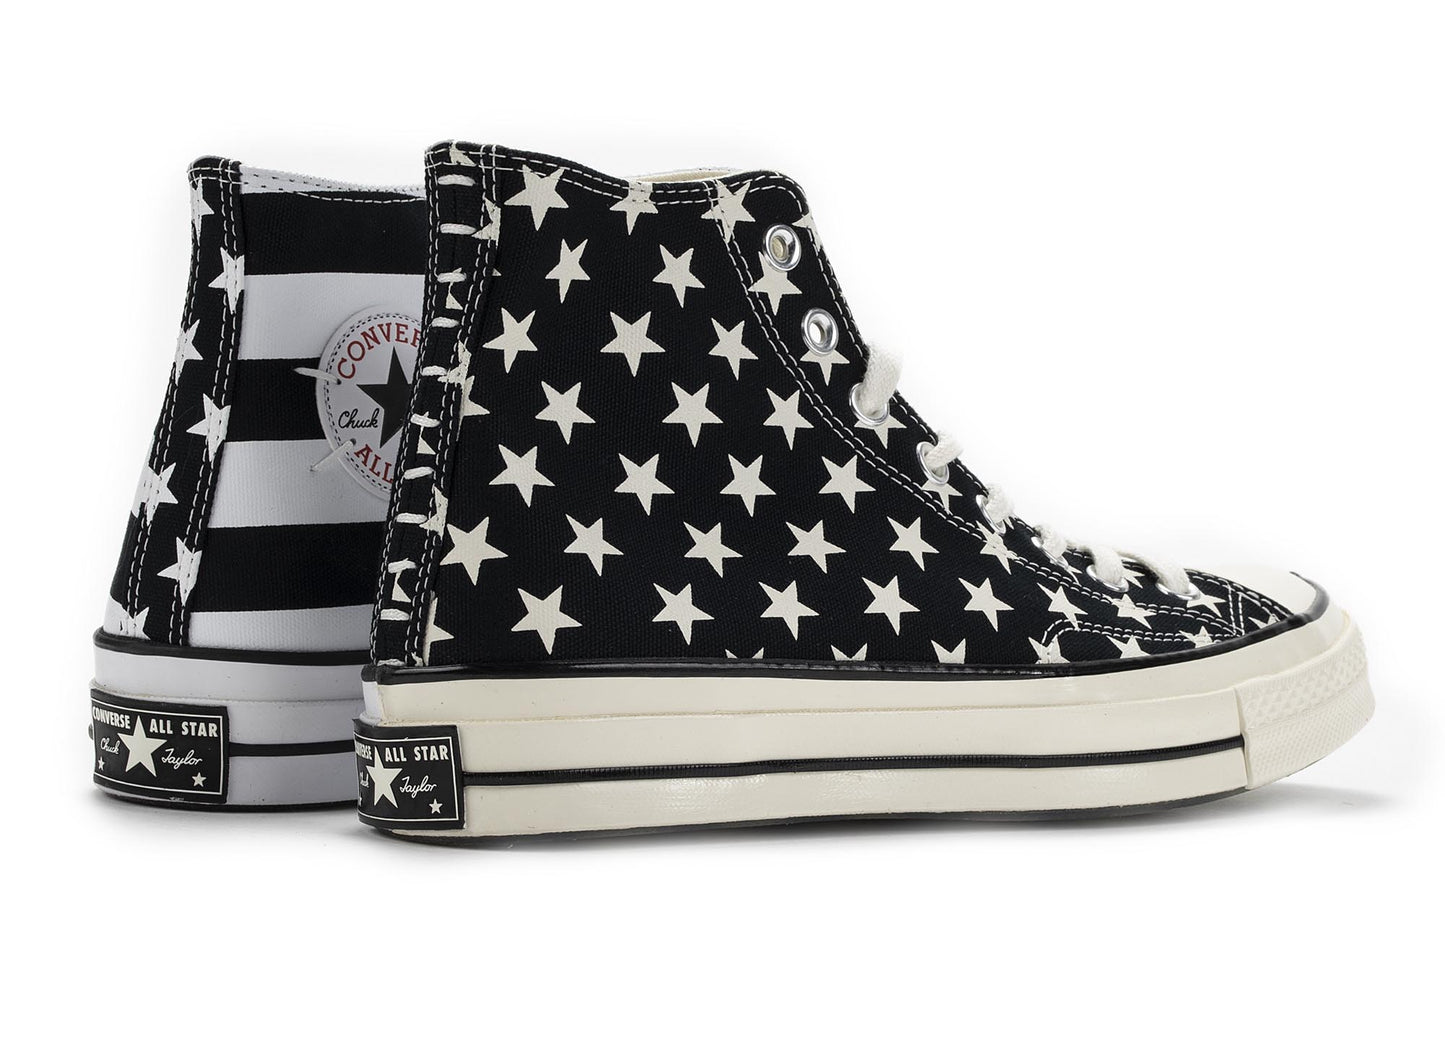 Converse Chuck 70 Archive Restructured High Top